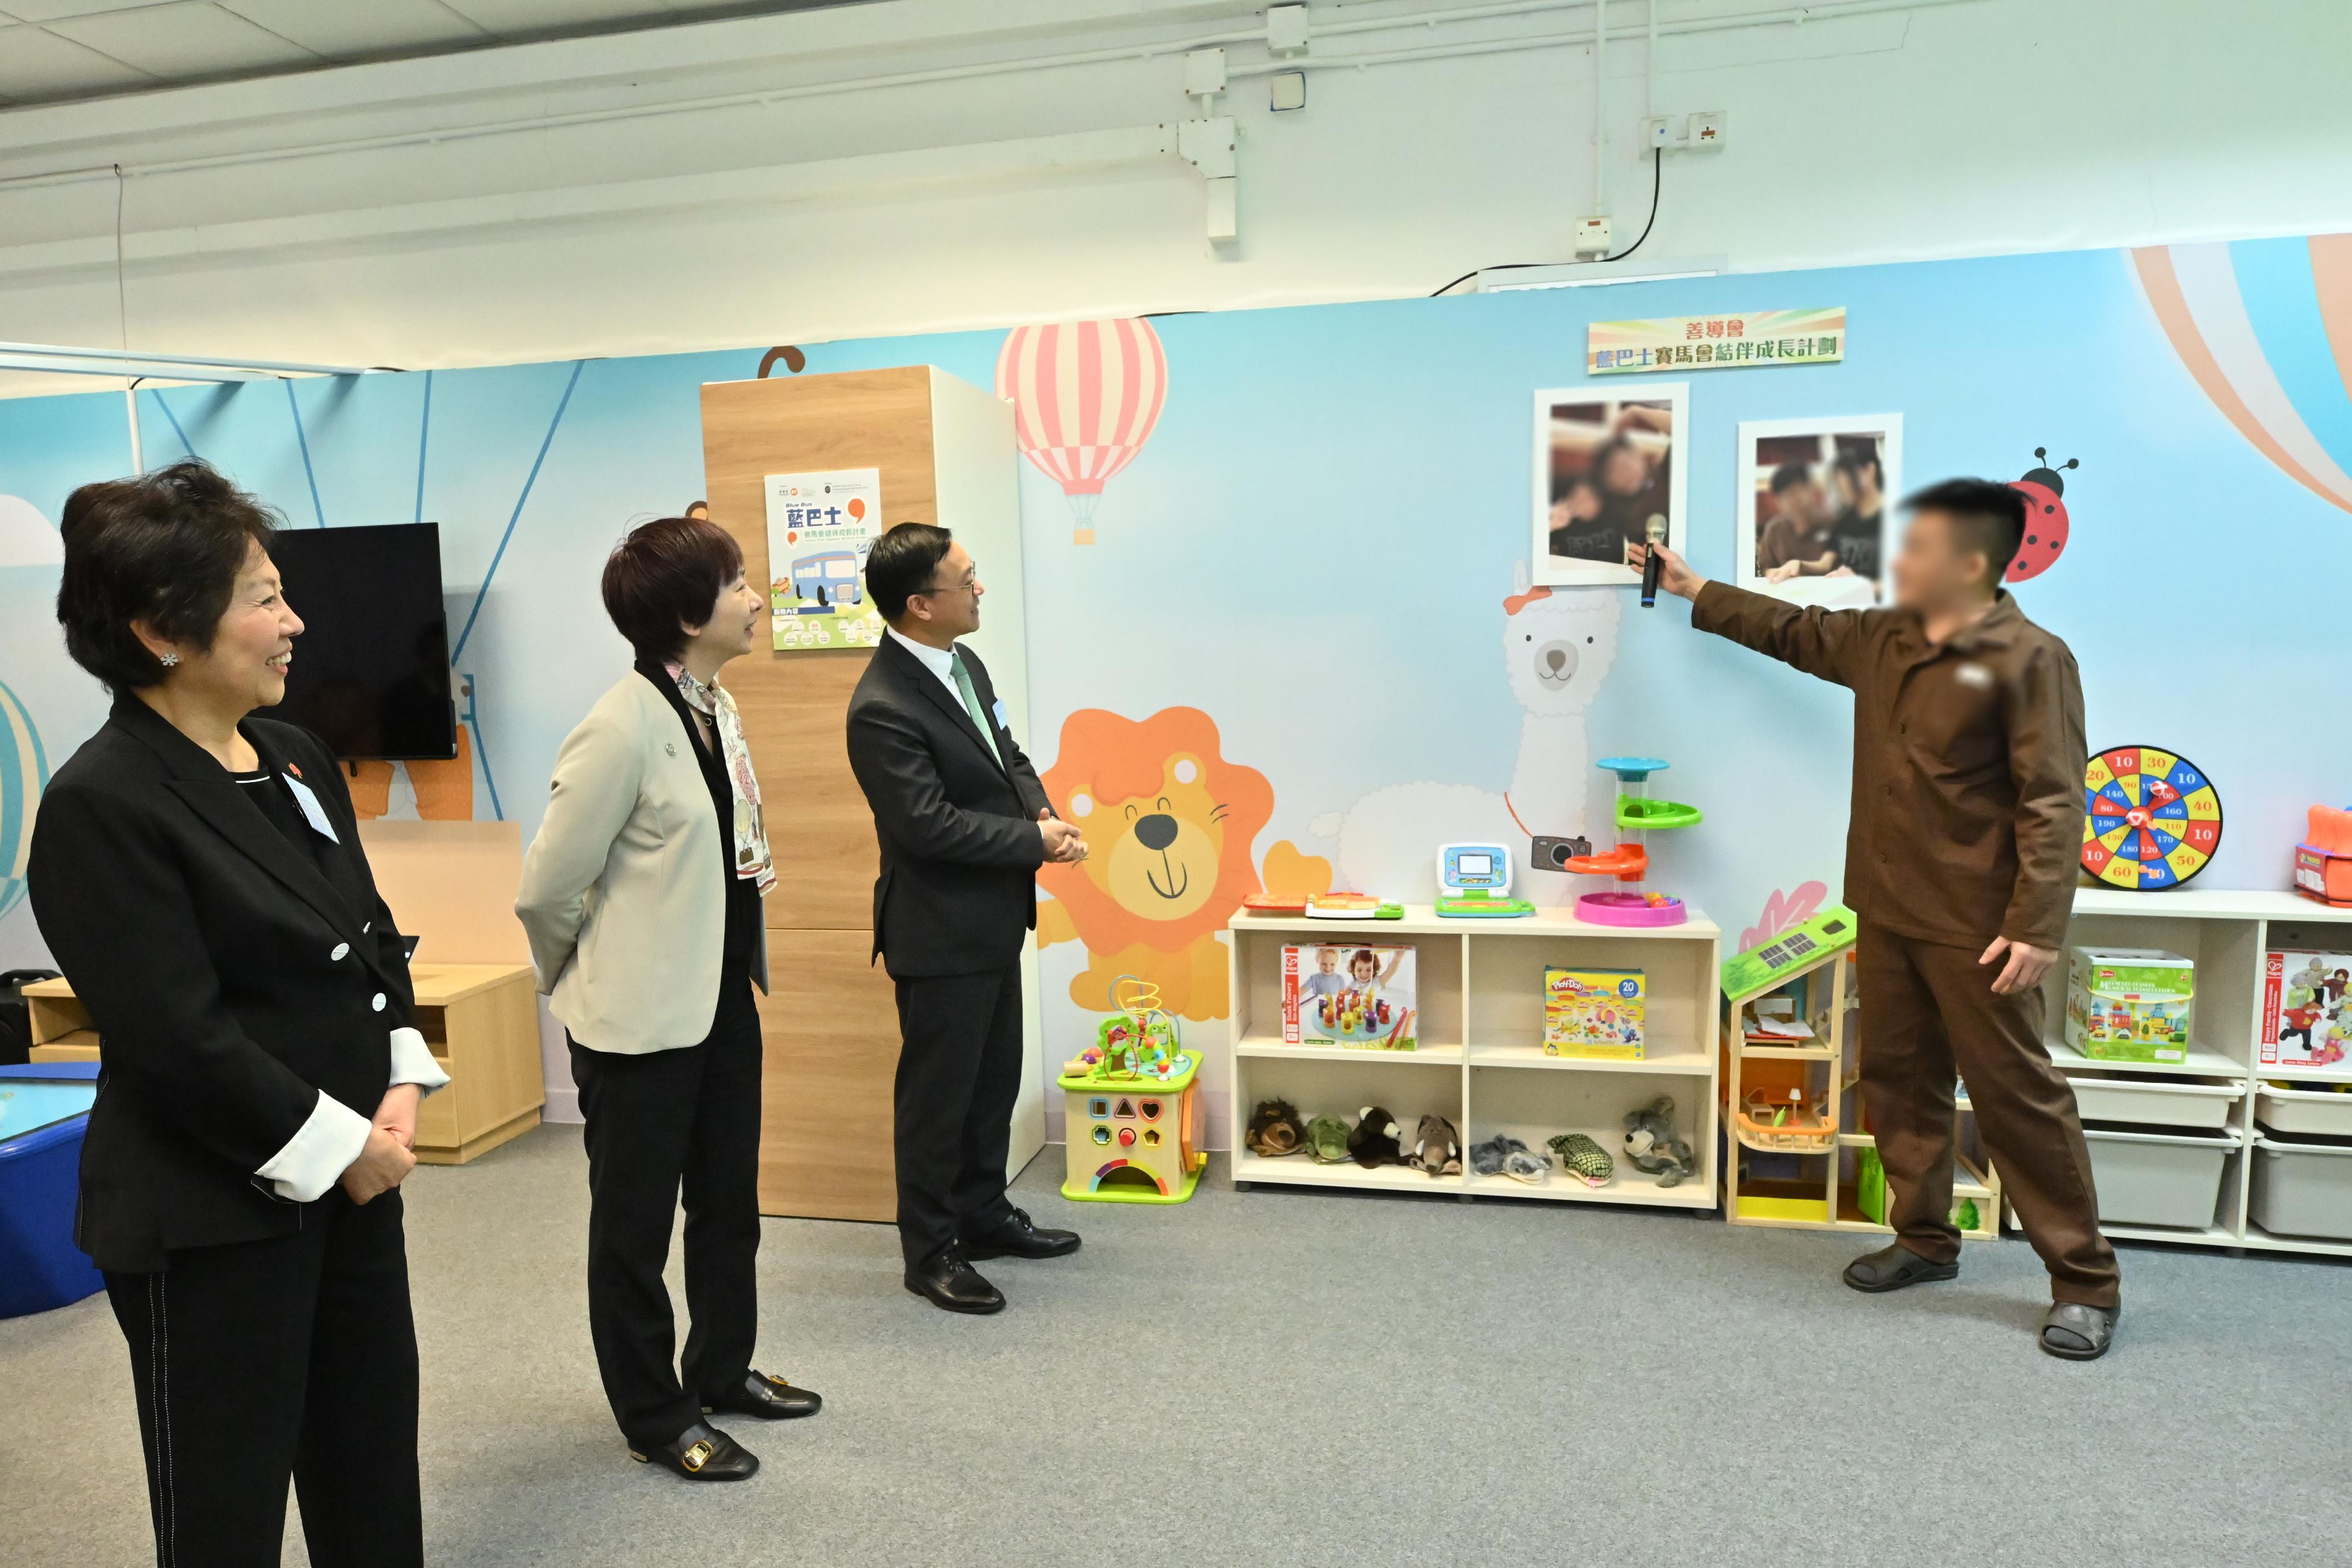 The Correctional Services Department officially launched a Parent-child Centre in Stanley Prison today (December 13). Photo shows the Chairman of the Committee on Community Support for Rehabilitated Offenders, Ms Tsui Li (first left); the Head of Charities (Youth Development & Poverty Alleviation) of the Hong Kong Jockey Club, Ms Winnie Ying (second left); and the Commissioner of Correctional Services, Mr Wong Kwok-hing (second right), listening to the sharing by a person in custody.